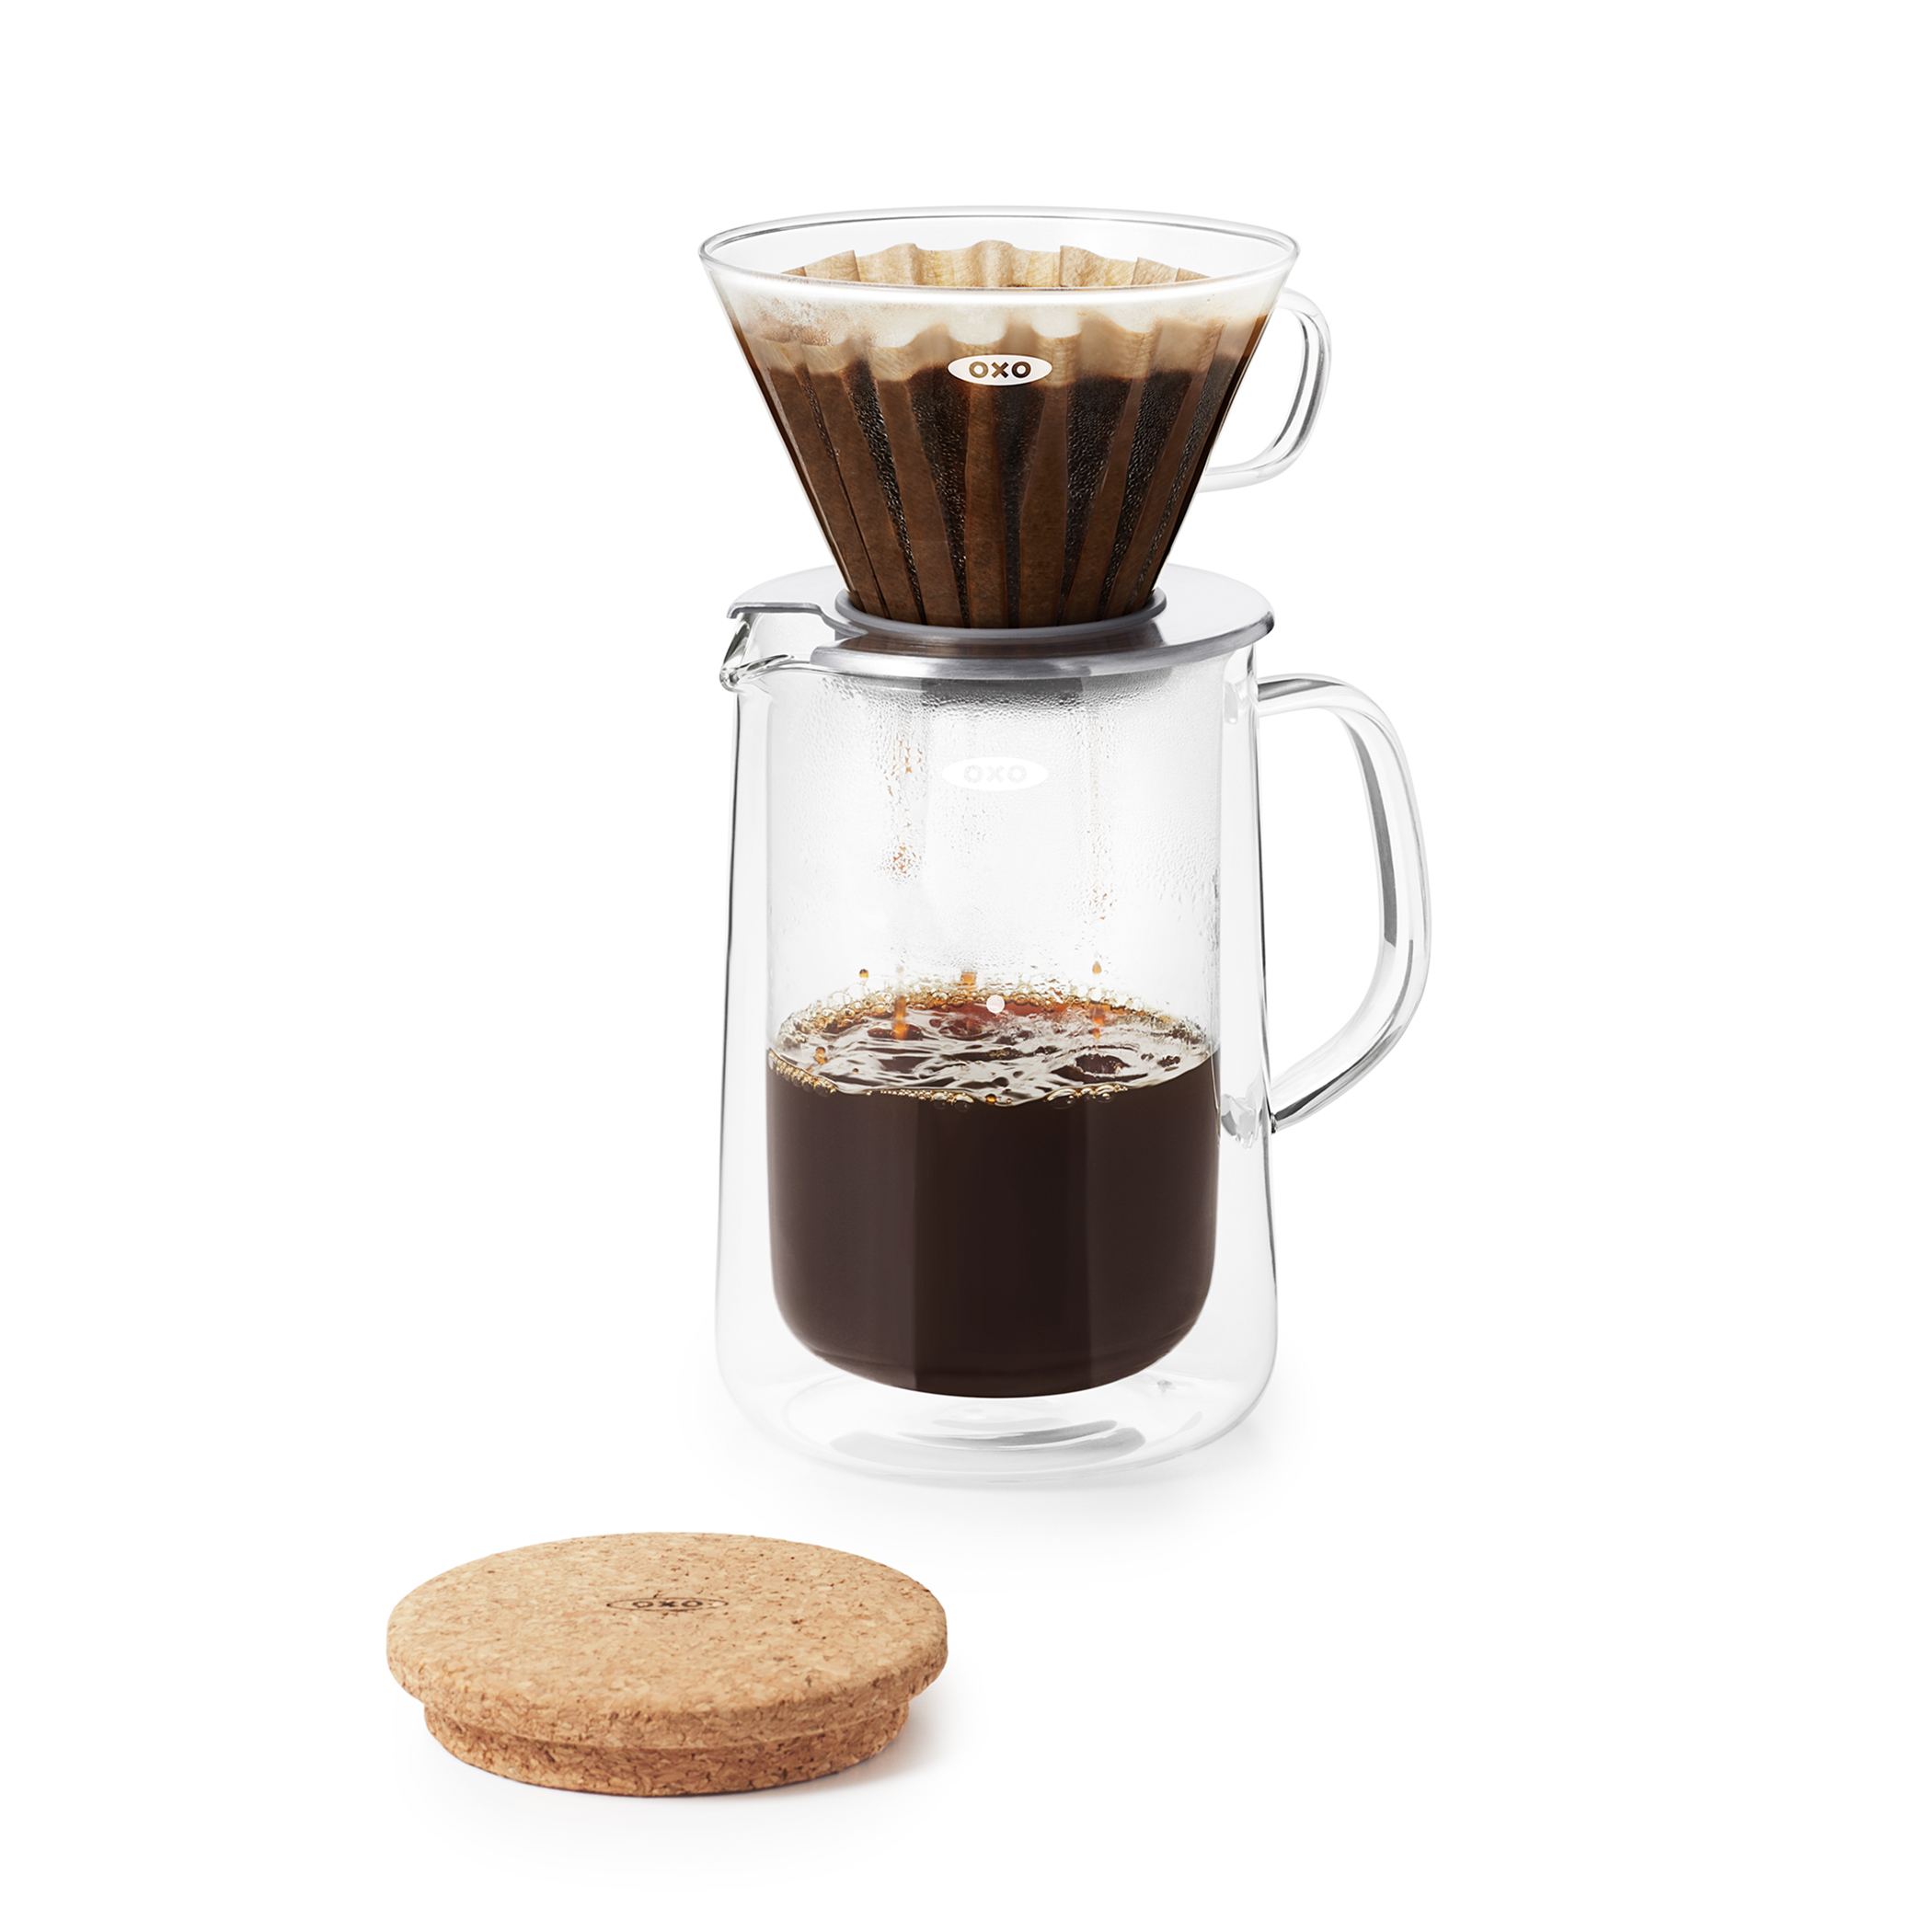 11207300oxo-good-grips-glass-pour-over-coffee-maker.jpg